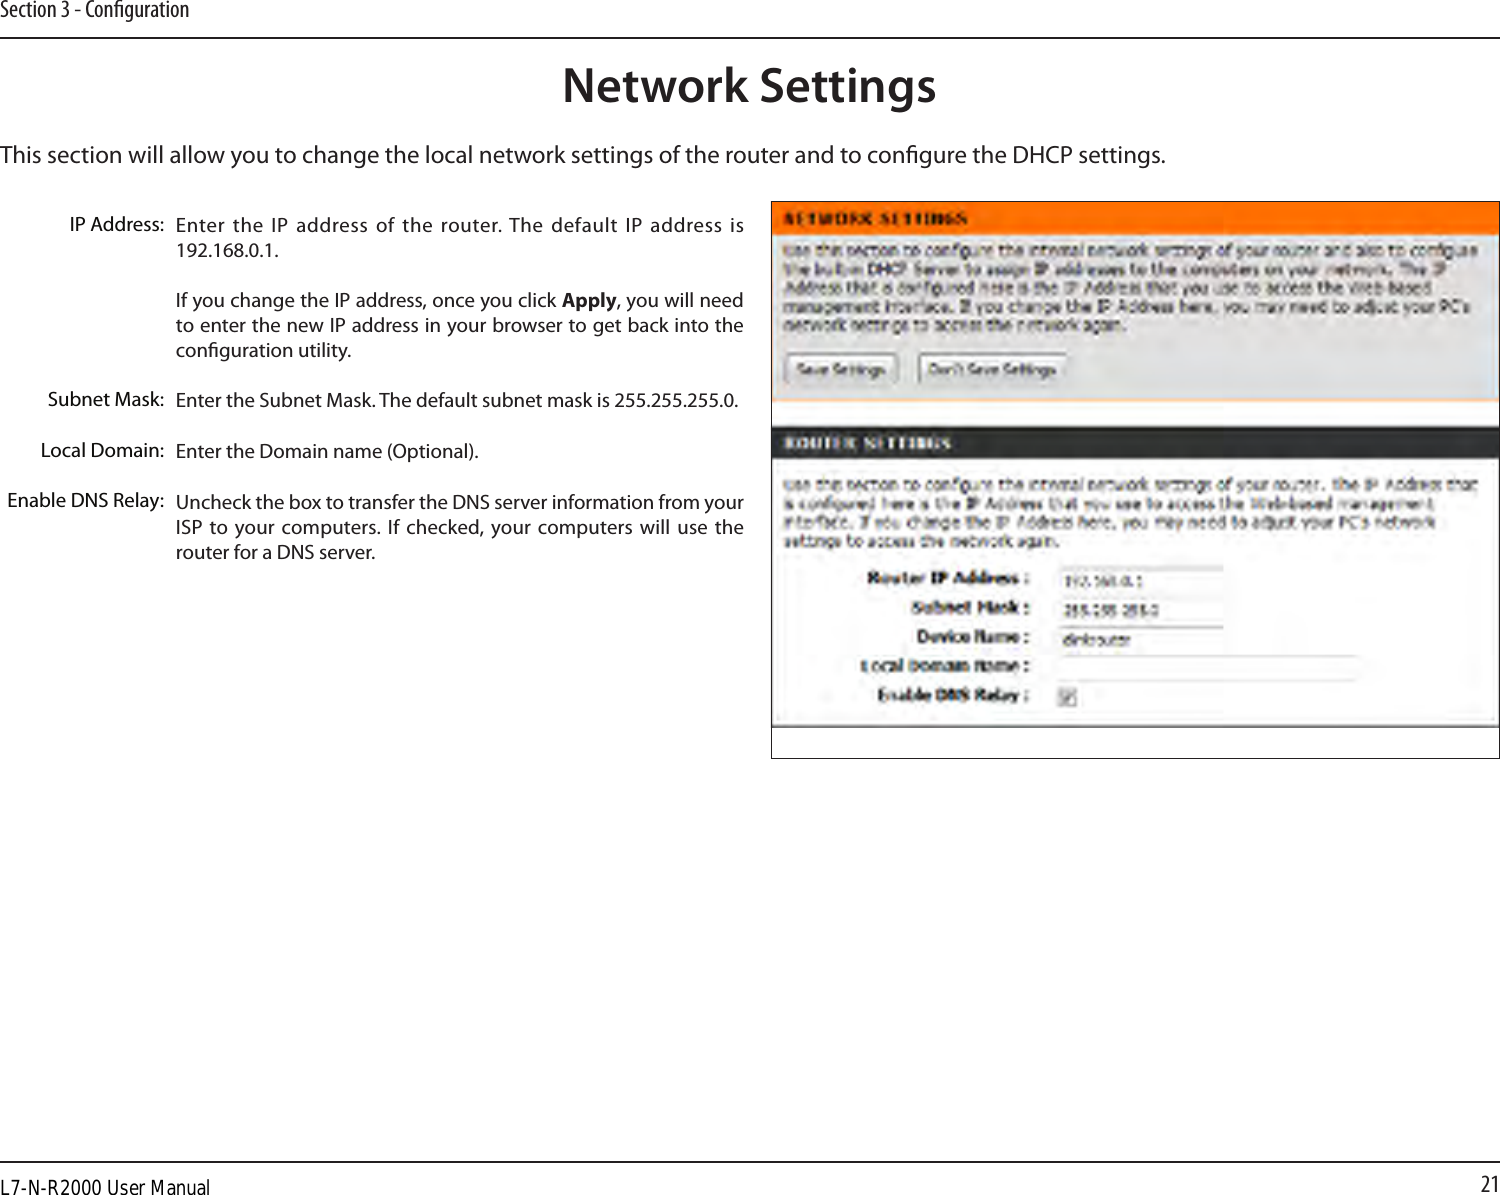 21Section 3 - CongurationThis section will allow you to change the local network settings of the router and to congure the DHCP settings.Network SettingsEnter the IP address  of the router. The default IP  address is 192.168.0.1.If you change the IP address, once you click Apply, you will need to enter the new IP address in your browser to get back into the conguration utility.Enter the Subnet Mask. The default subnet mask is 255.255.255.0.Enter the Domain name (Optional).Uncheck the box to transfer the DNS server information from your ISP to  your computers. If  checked, your computers will  use the router for a DNS server.IP Address:Subnet Mask:Local Domain:Enable DNS Relay:L7-N-R2000 User Manual